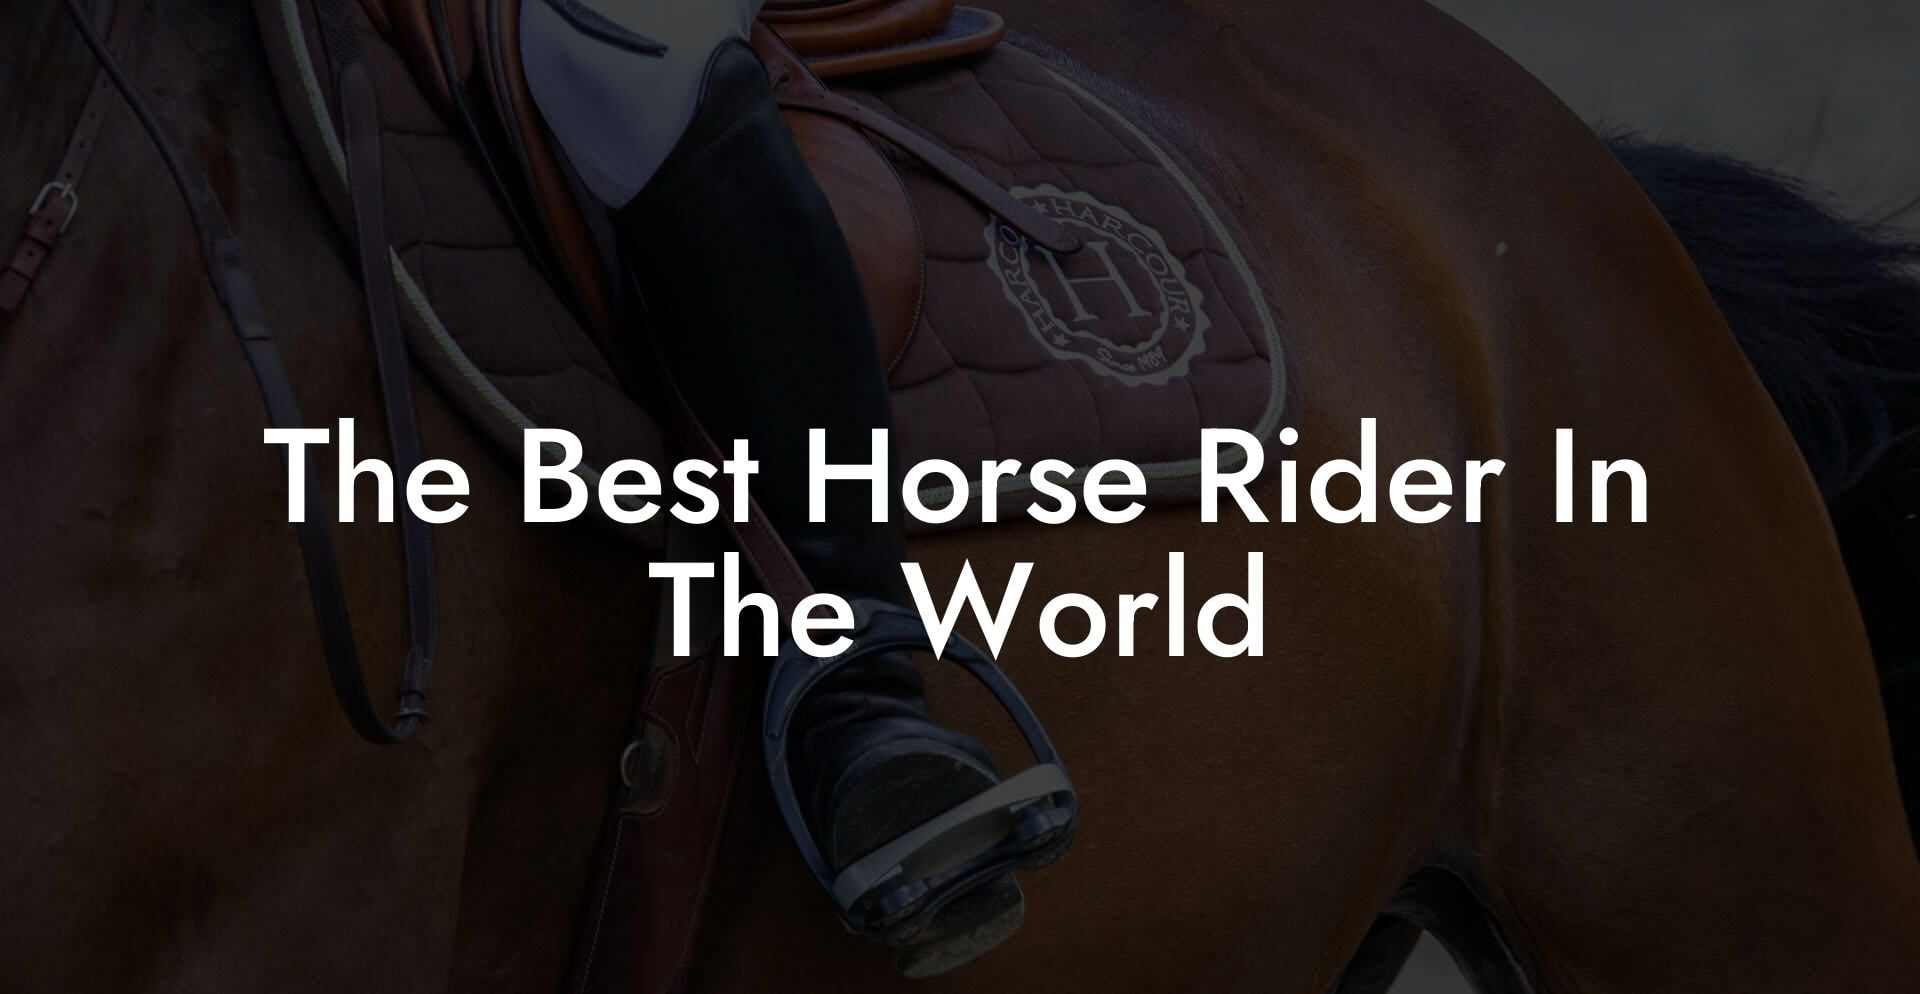 The Best Horse Rider In The World